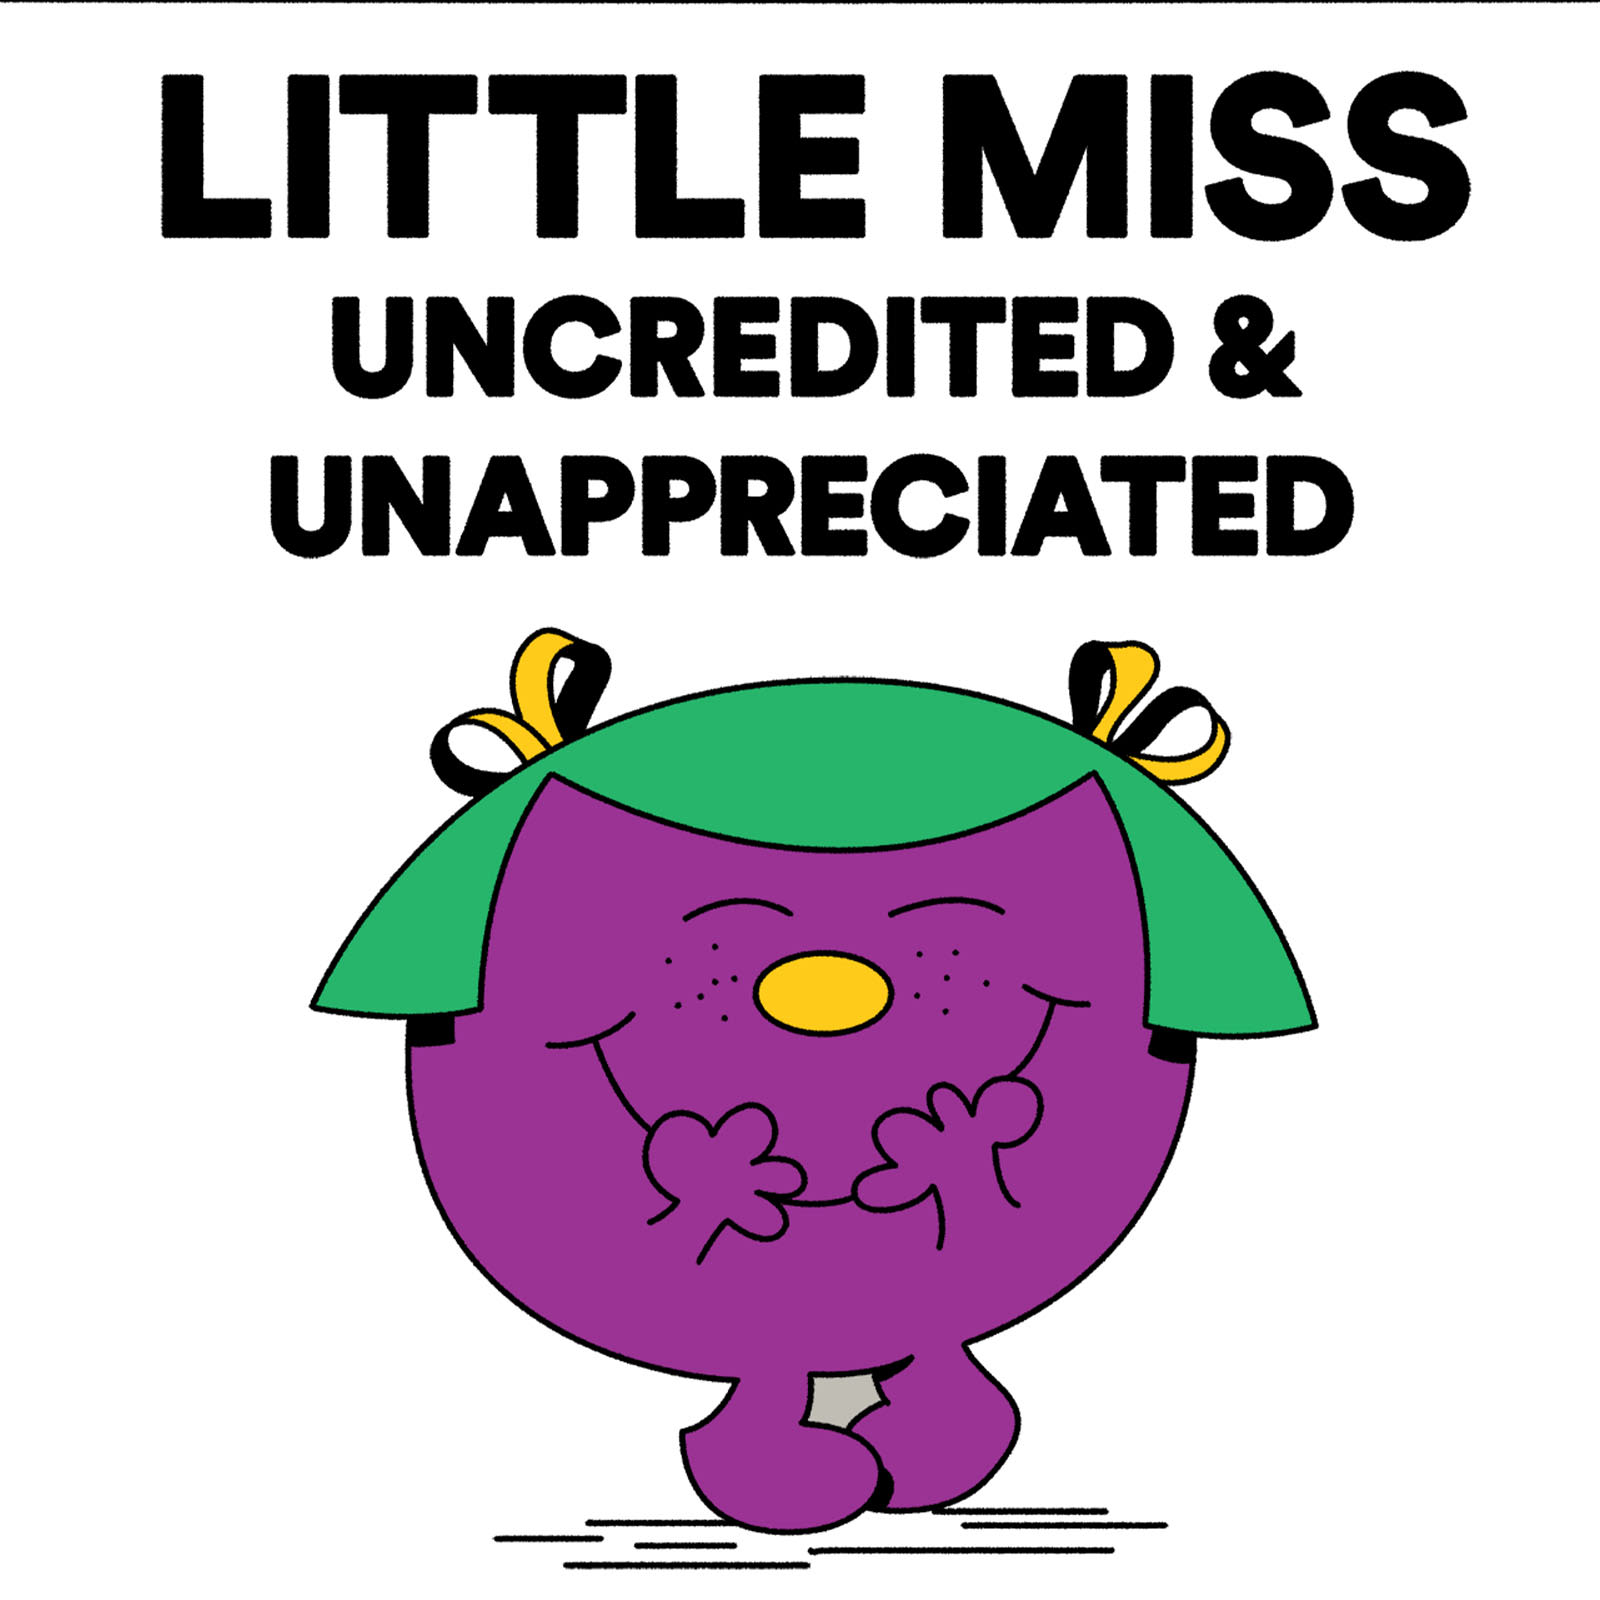 Little Miss Monetization: getting paid for going viral